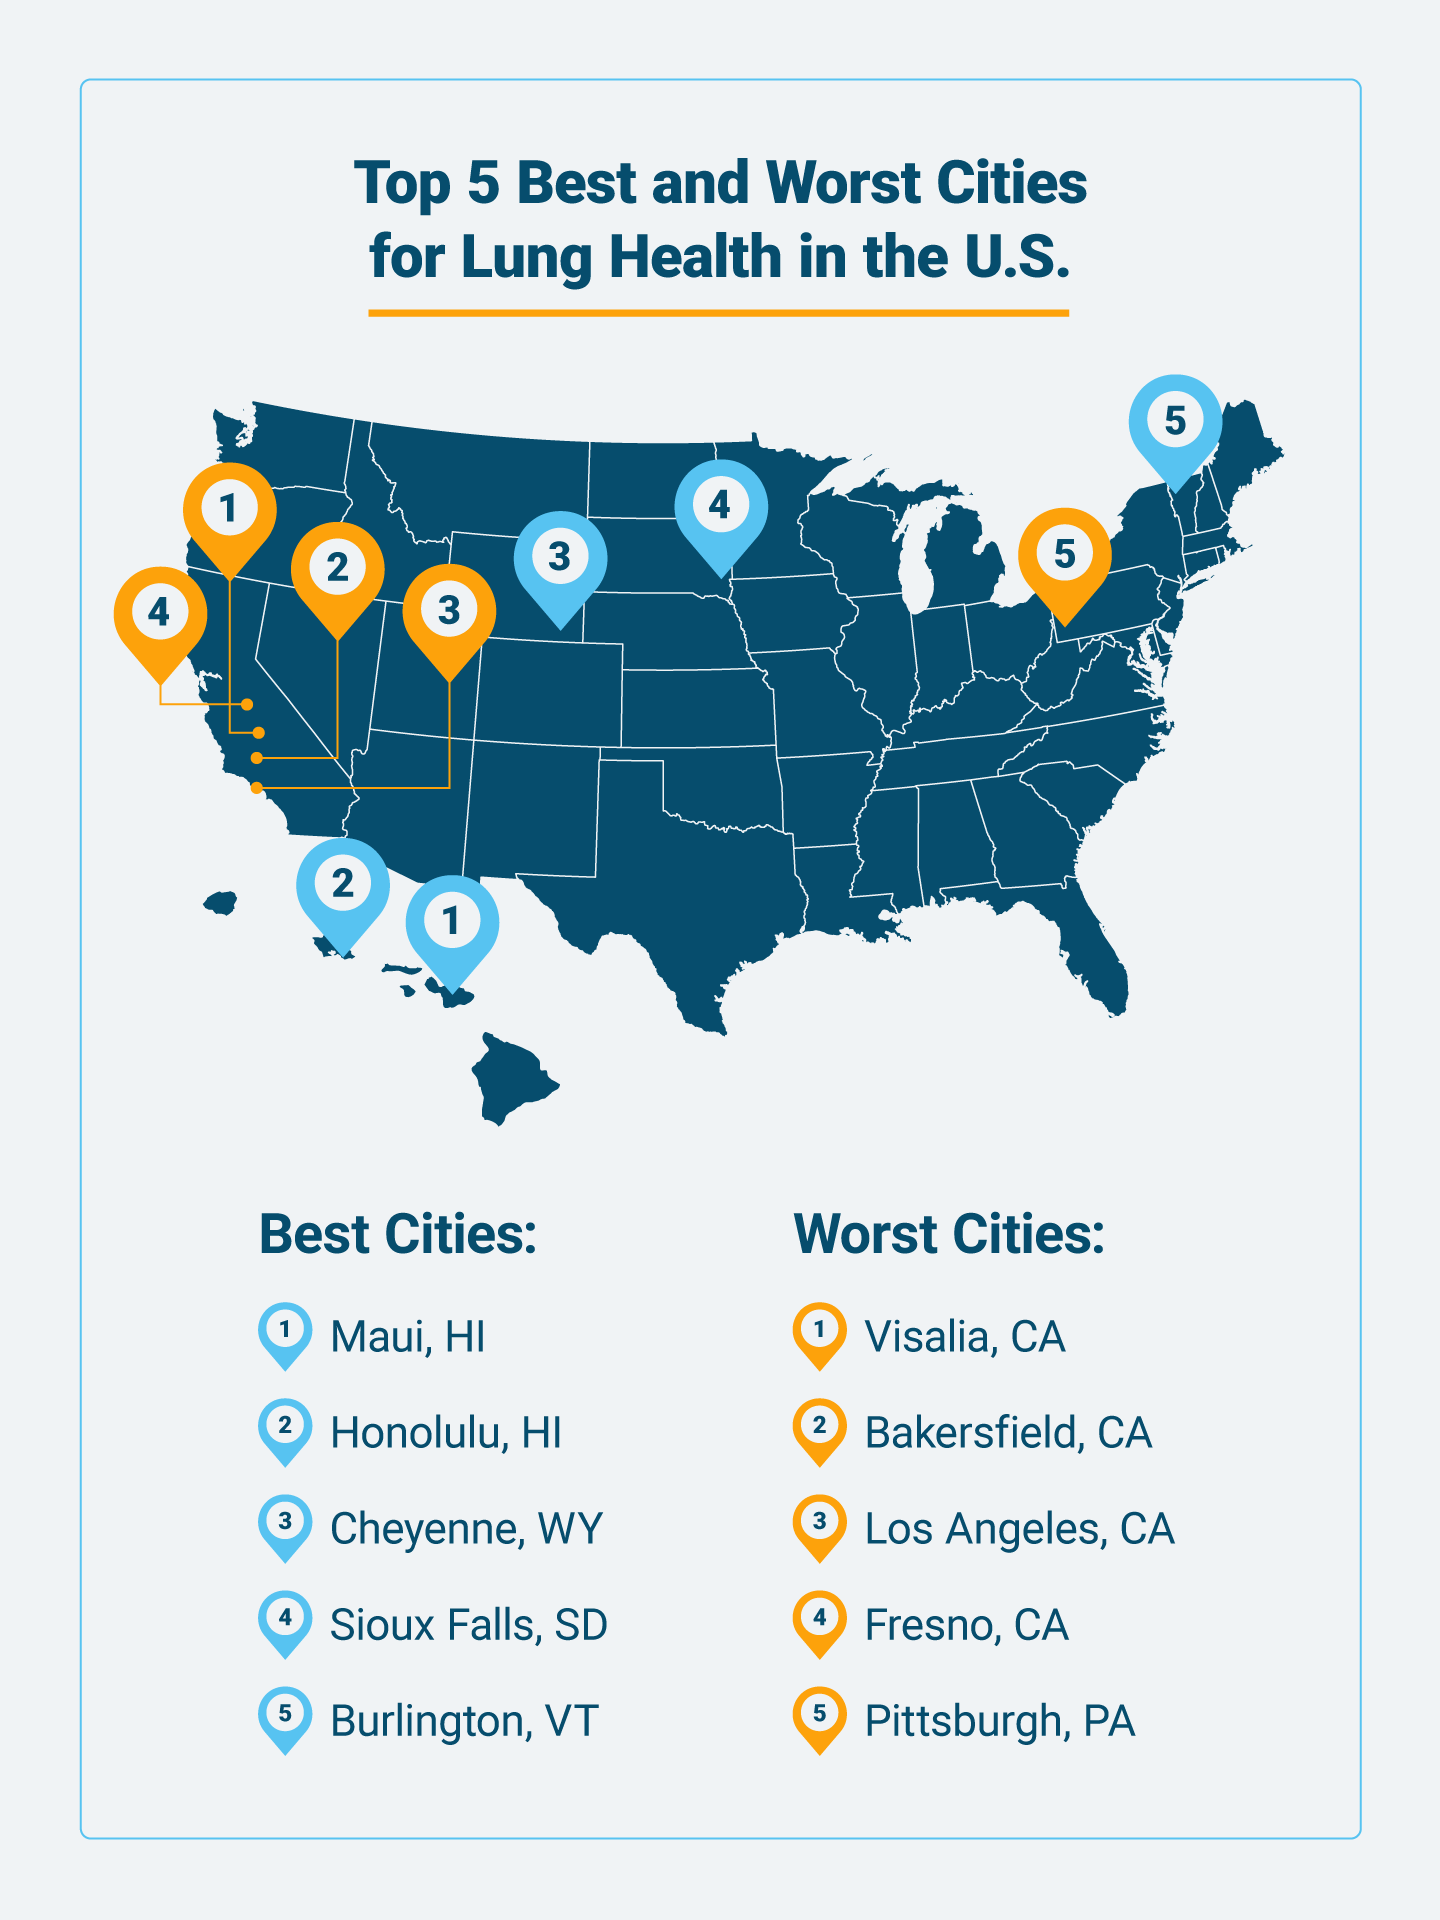 Top 5 best and worst cities for lung health in the U.S.